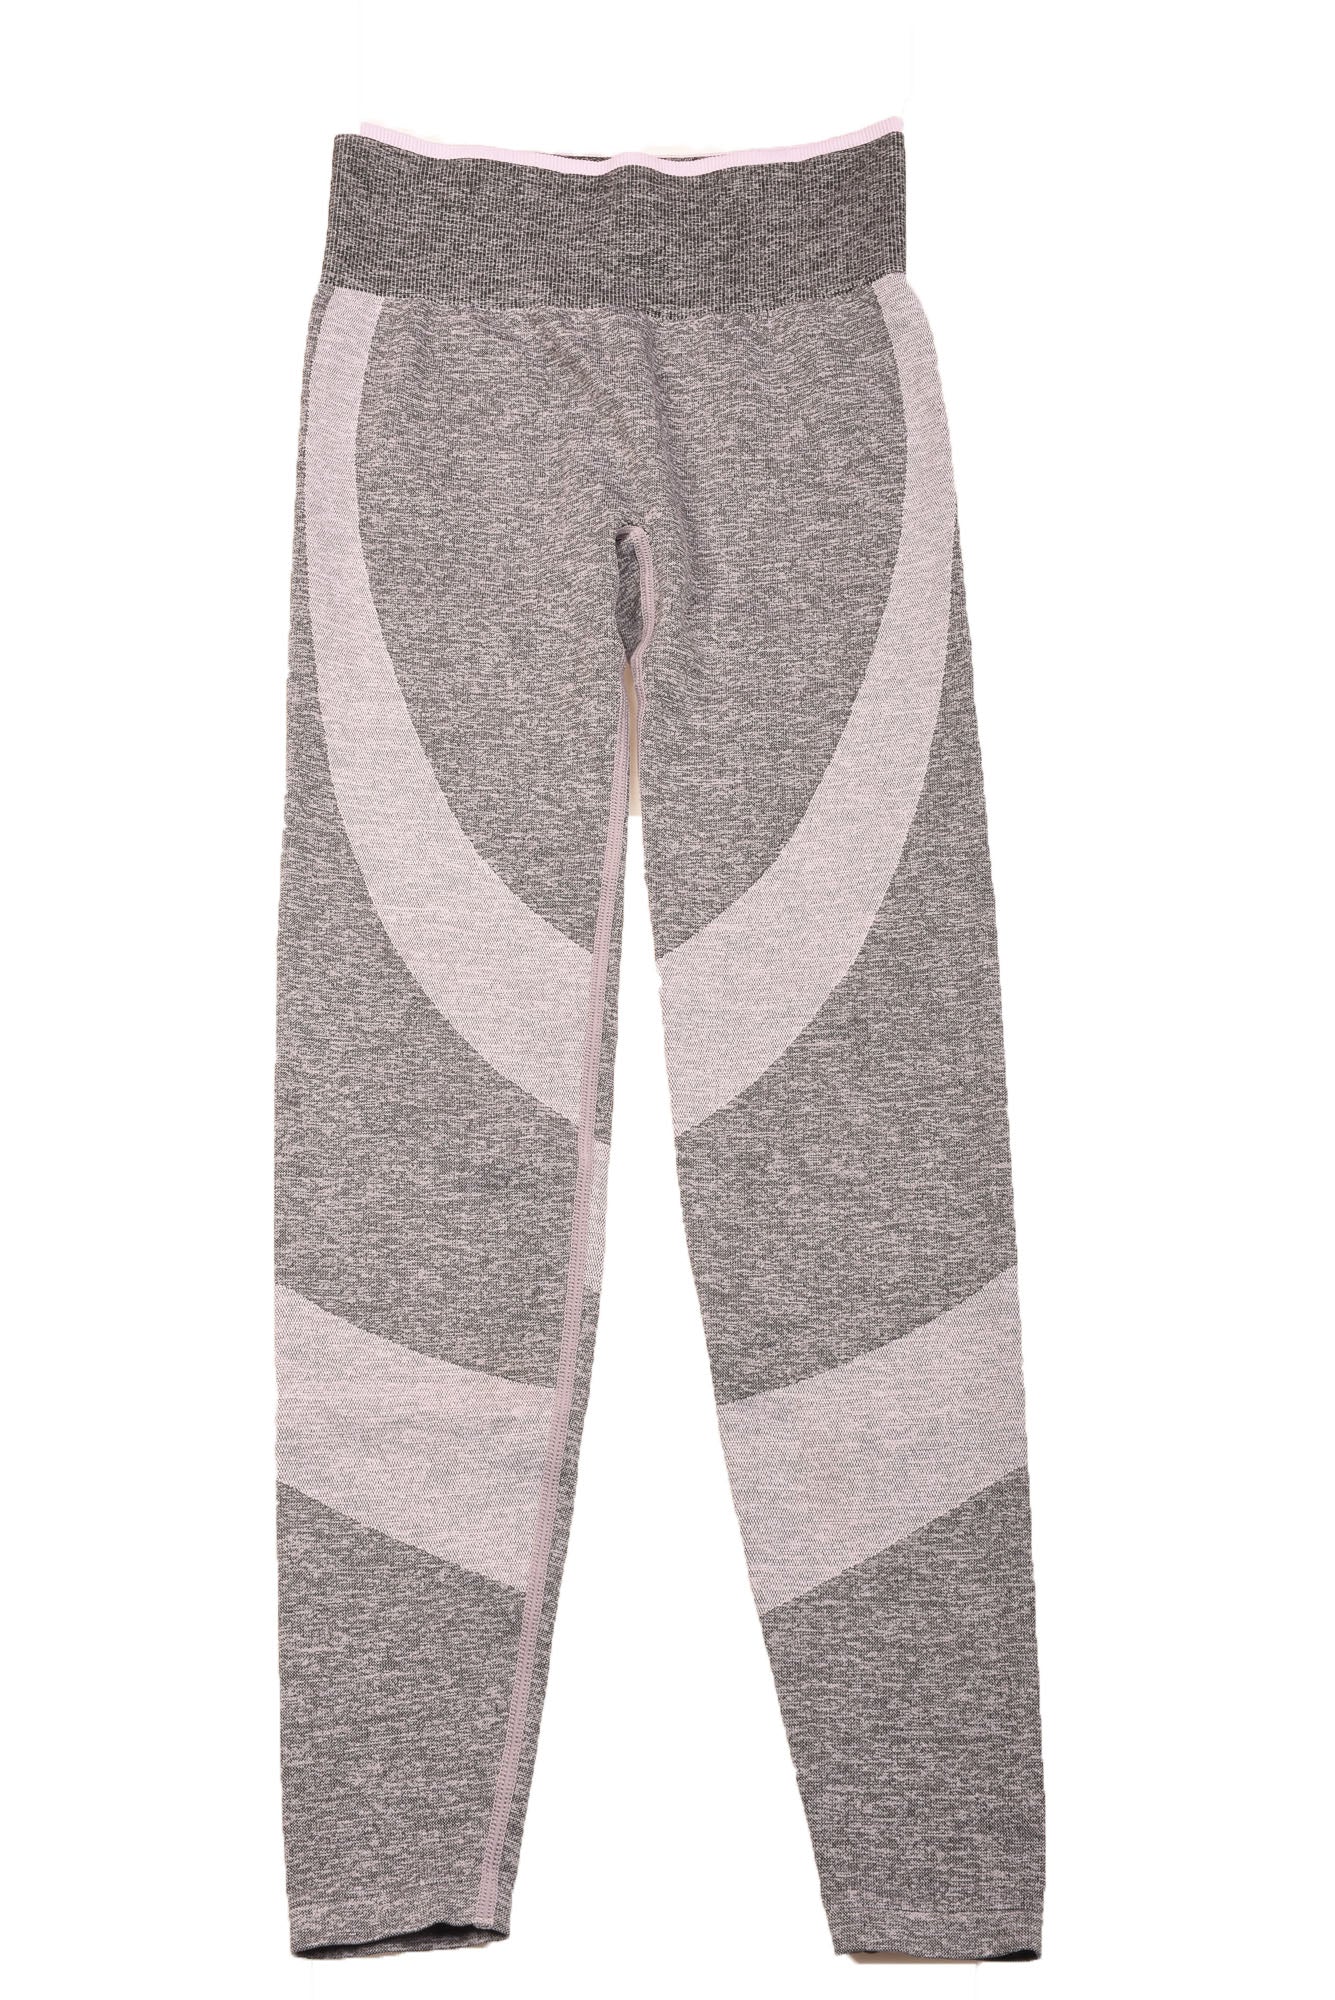 Women's Activewear Leggings By Pink By Victoria's Secret - Your Designer  Thrift